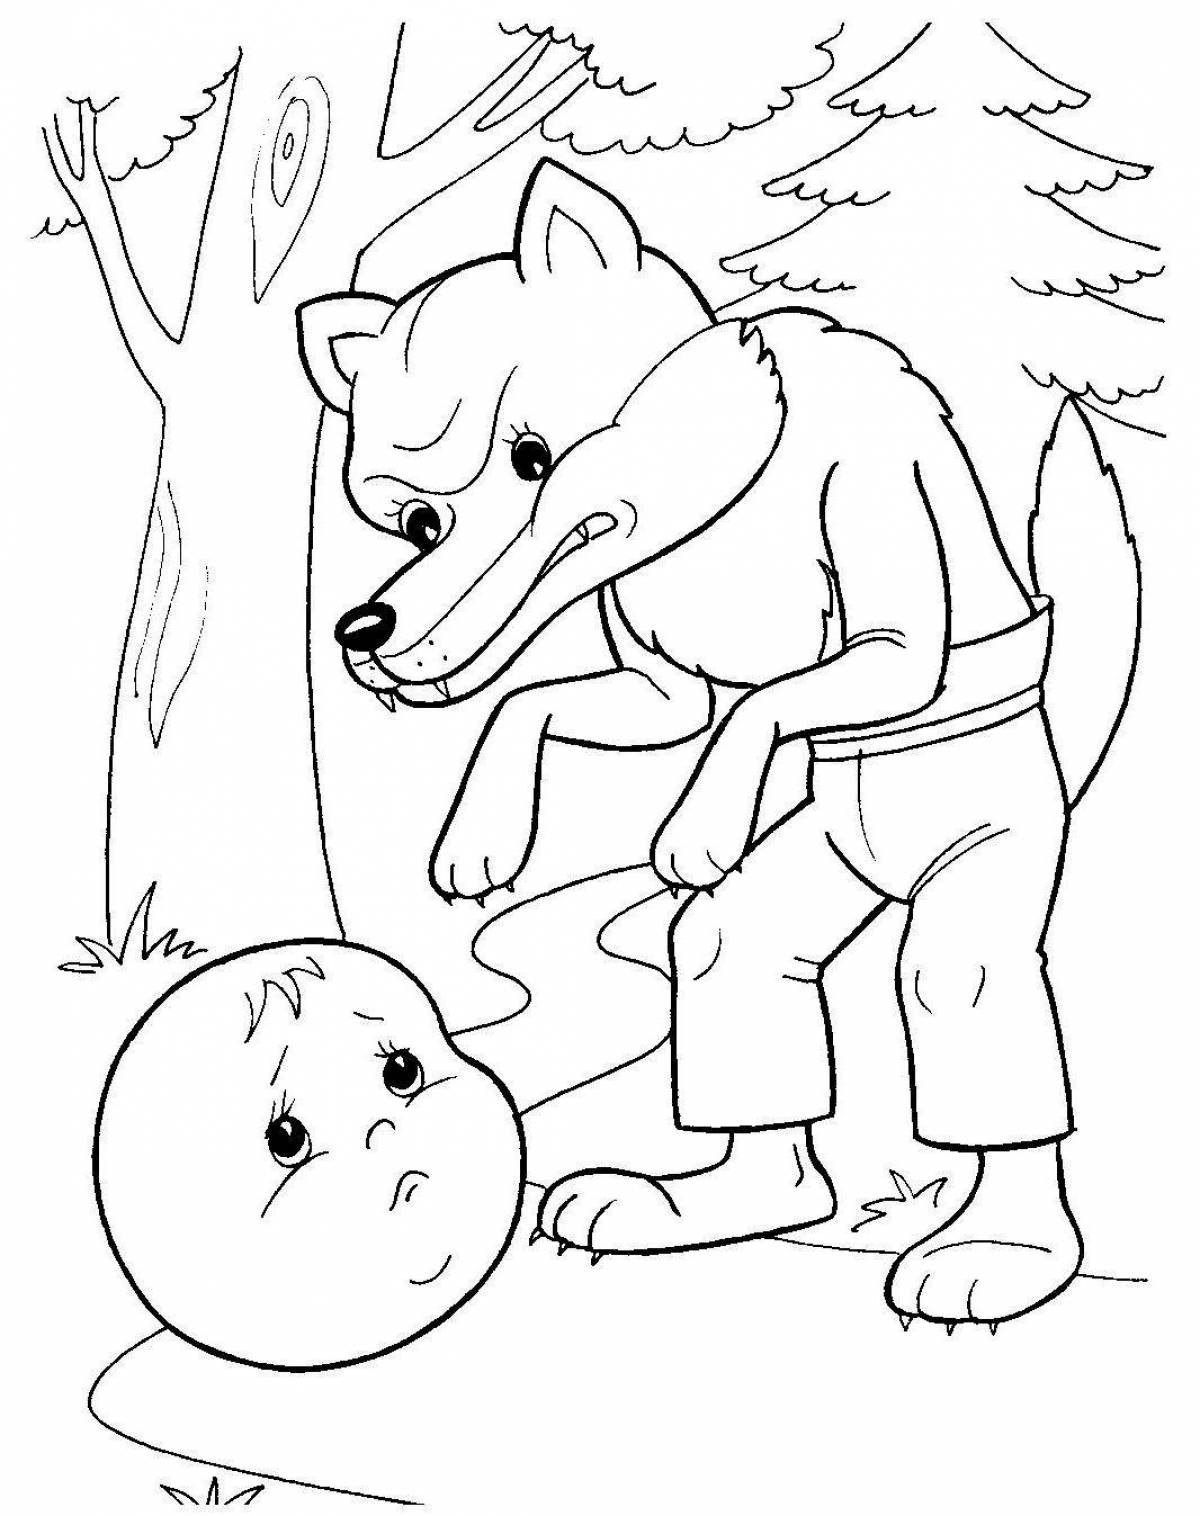 Exotic fairy tale coloring pages